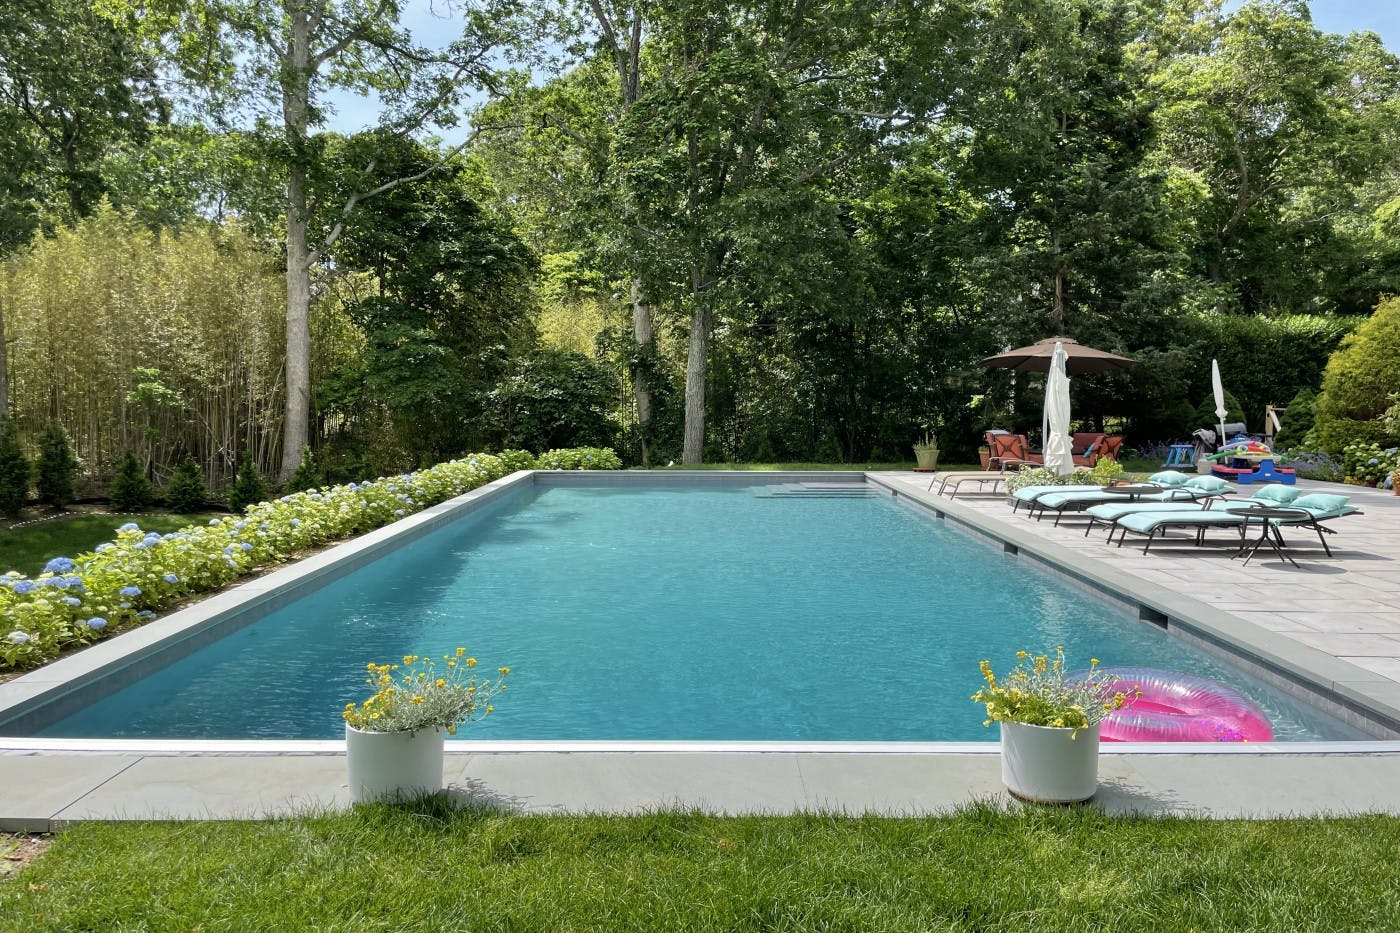 Pool and Patio Oasis in Sag Harbor